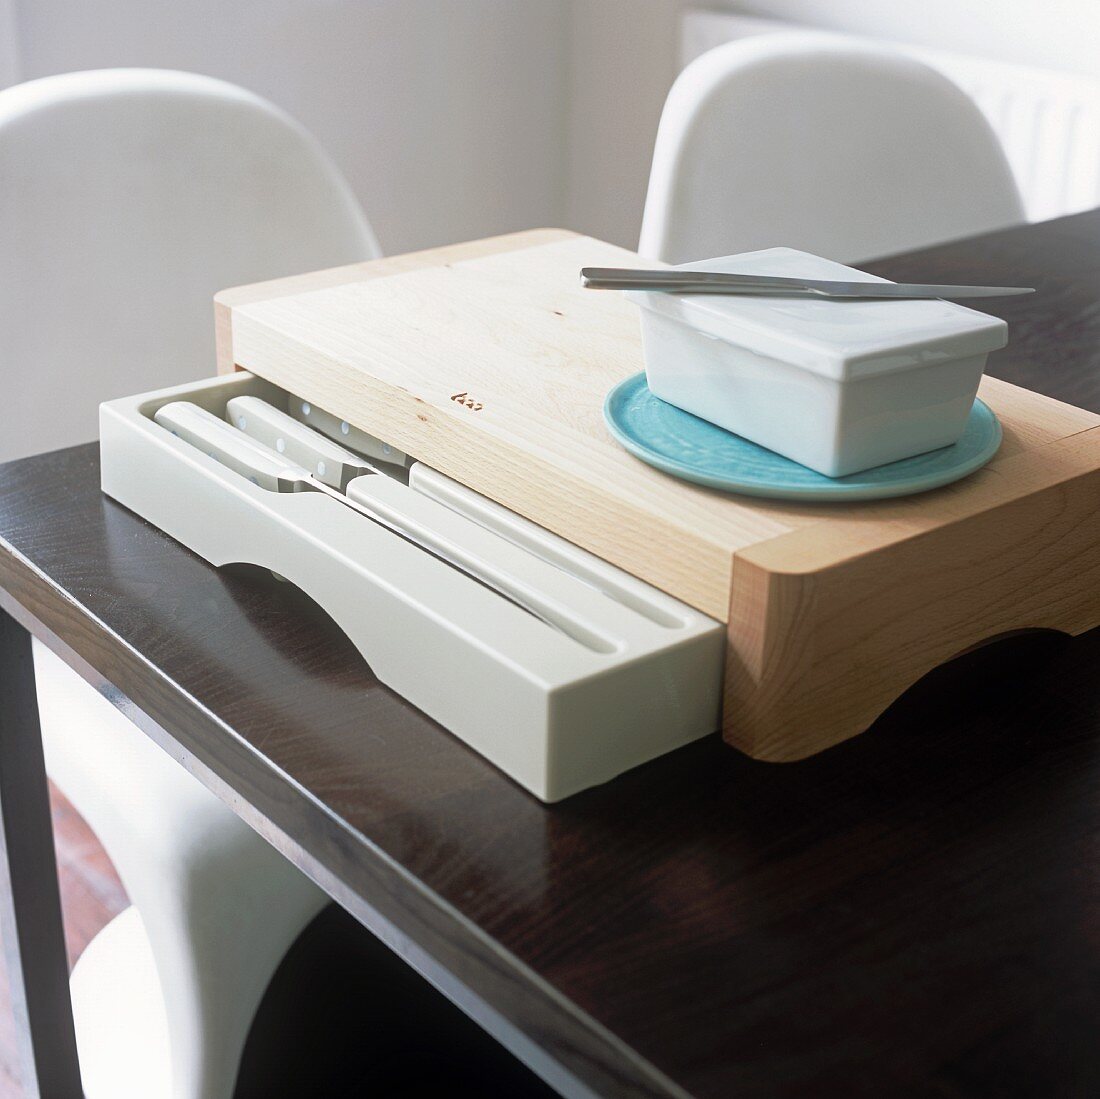 A chopping board with a built-in knife drawer